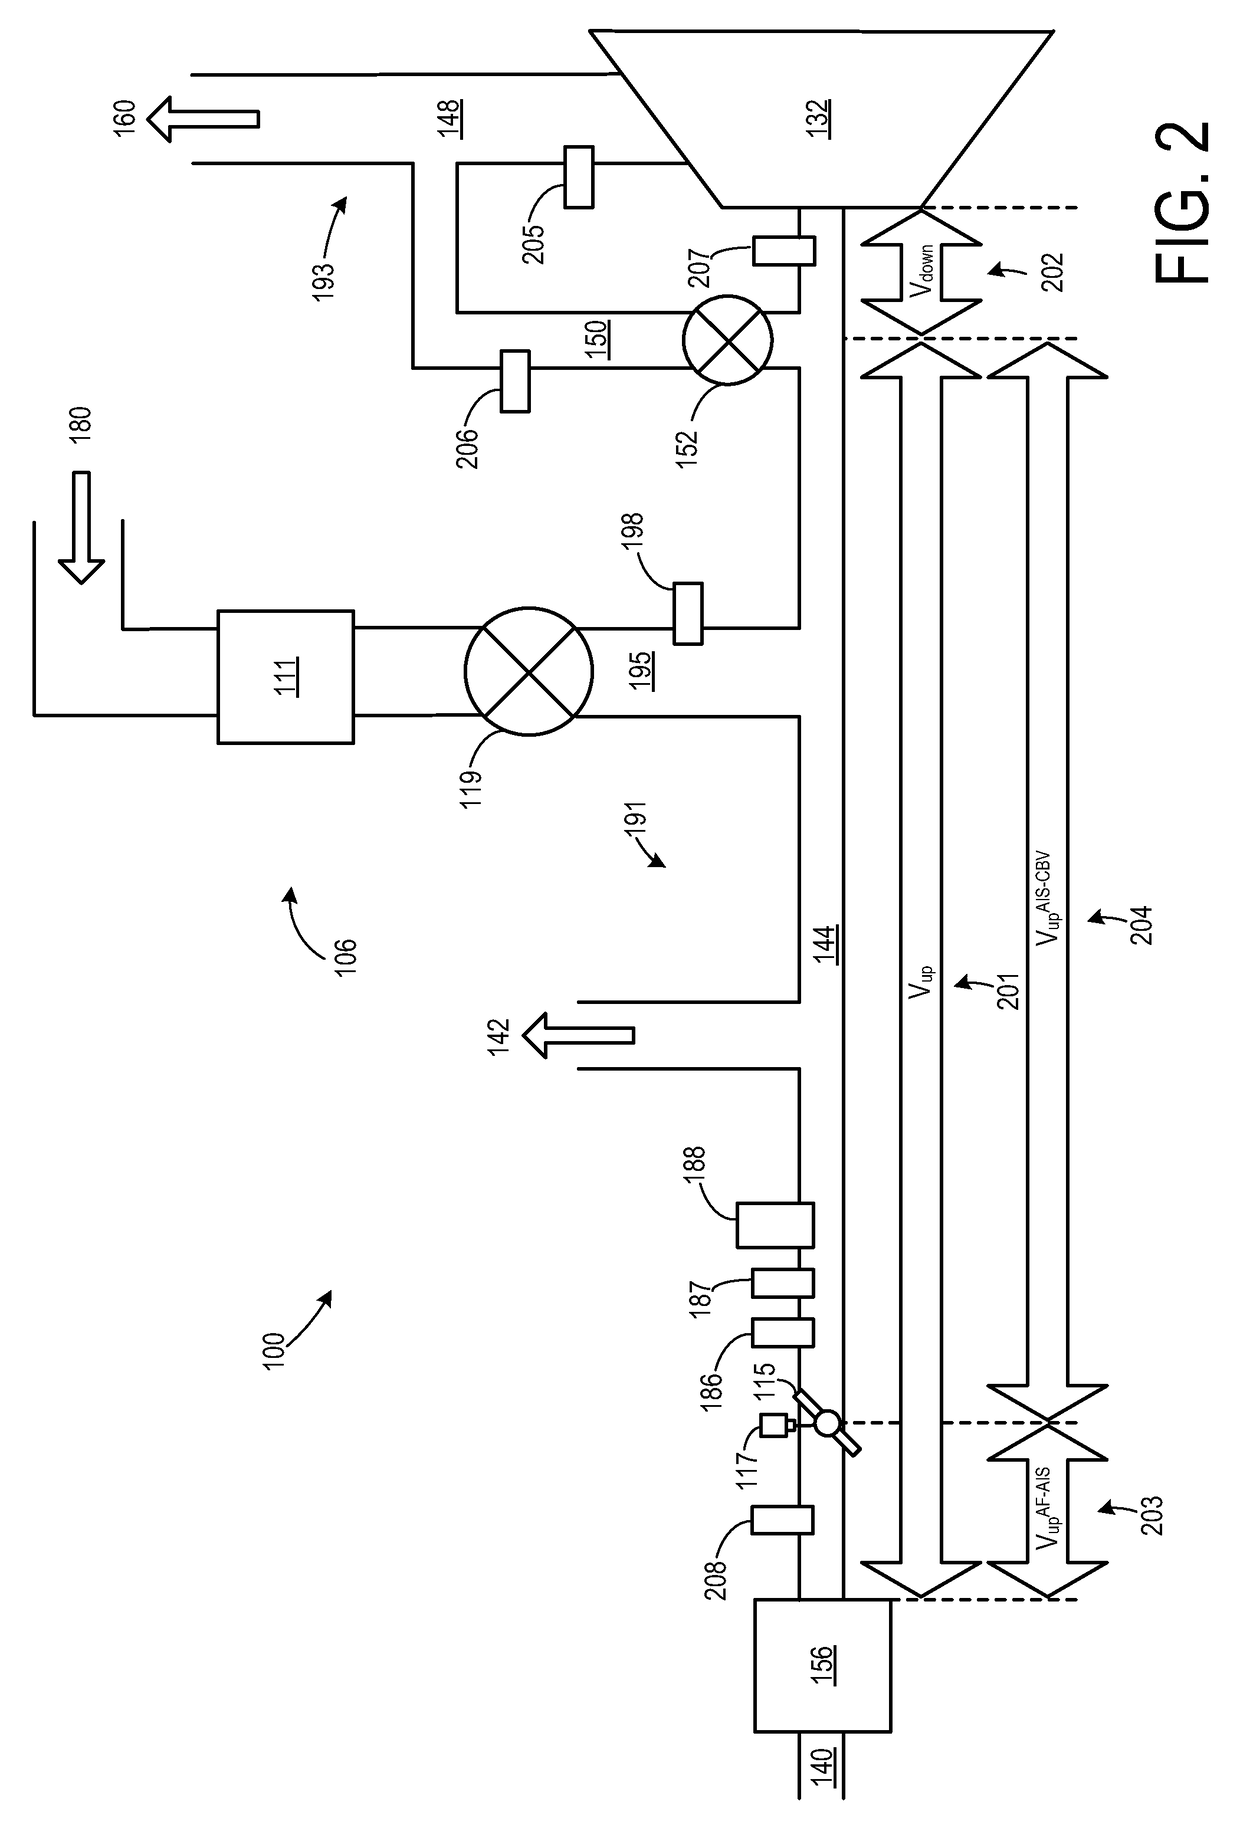 Methods and systems for low-pressure exhaust gas recirculation